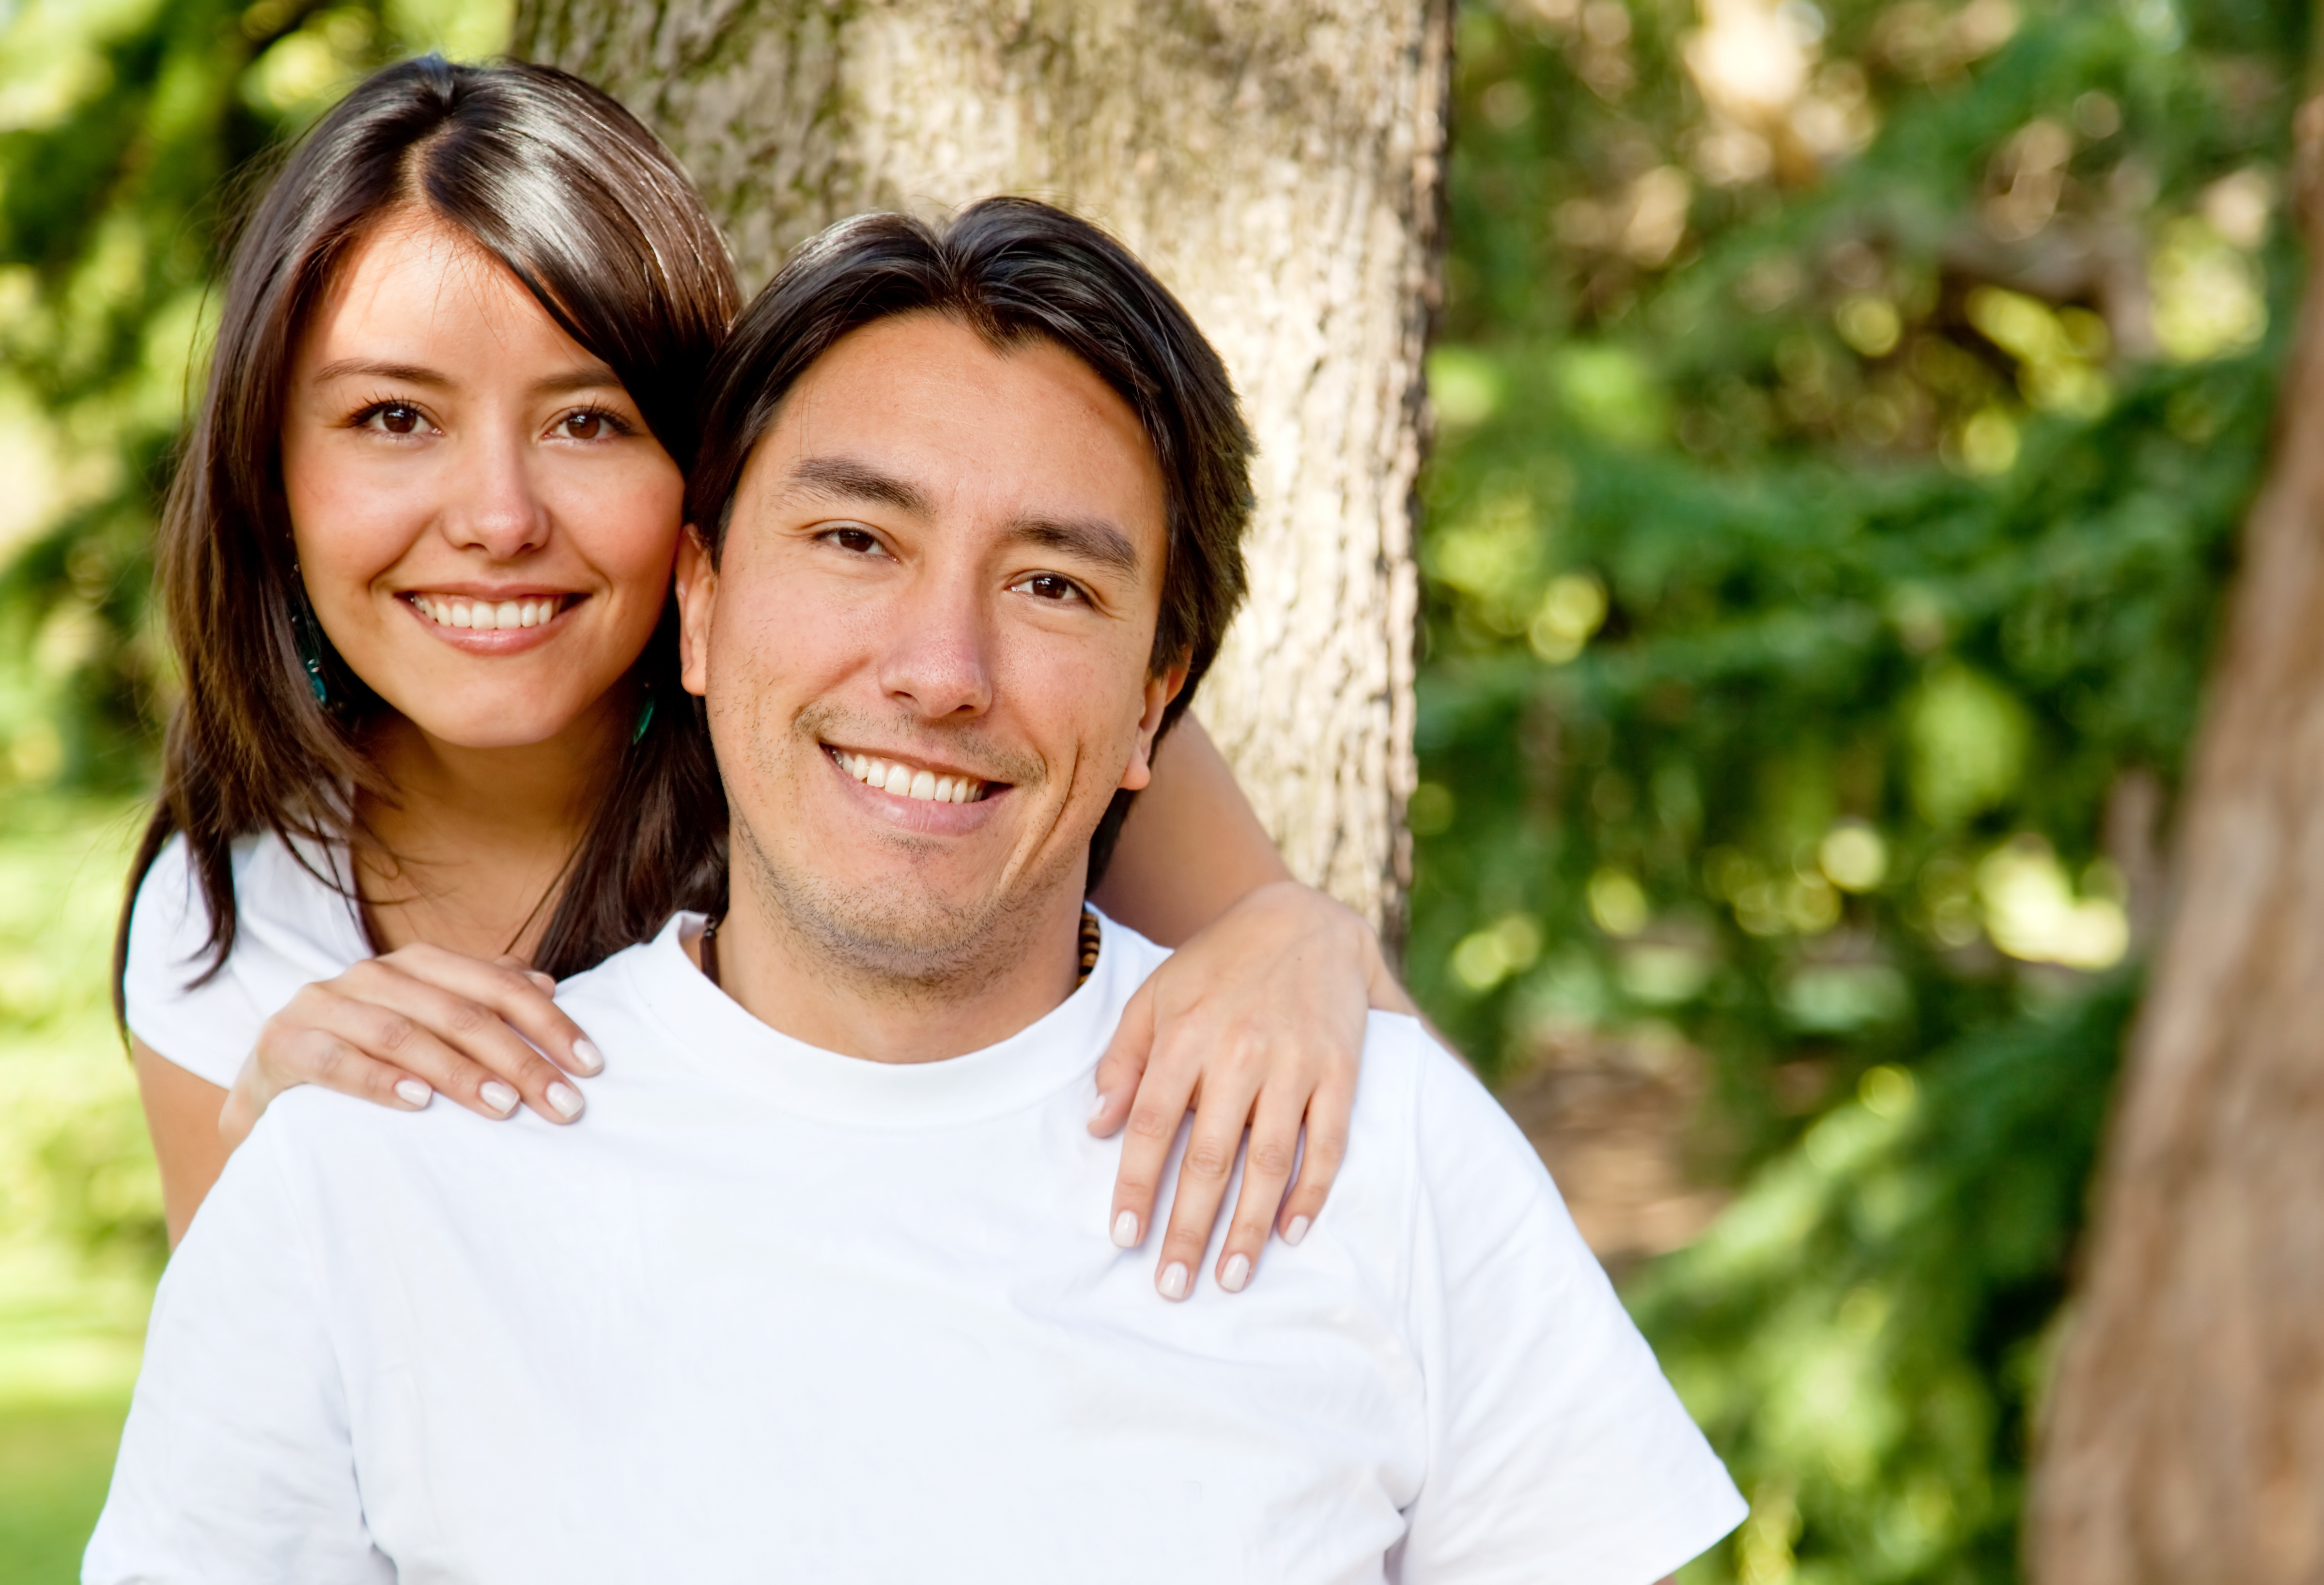 Close-up of a young man and woman both in white t-shirts, smiling, outside in a park.